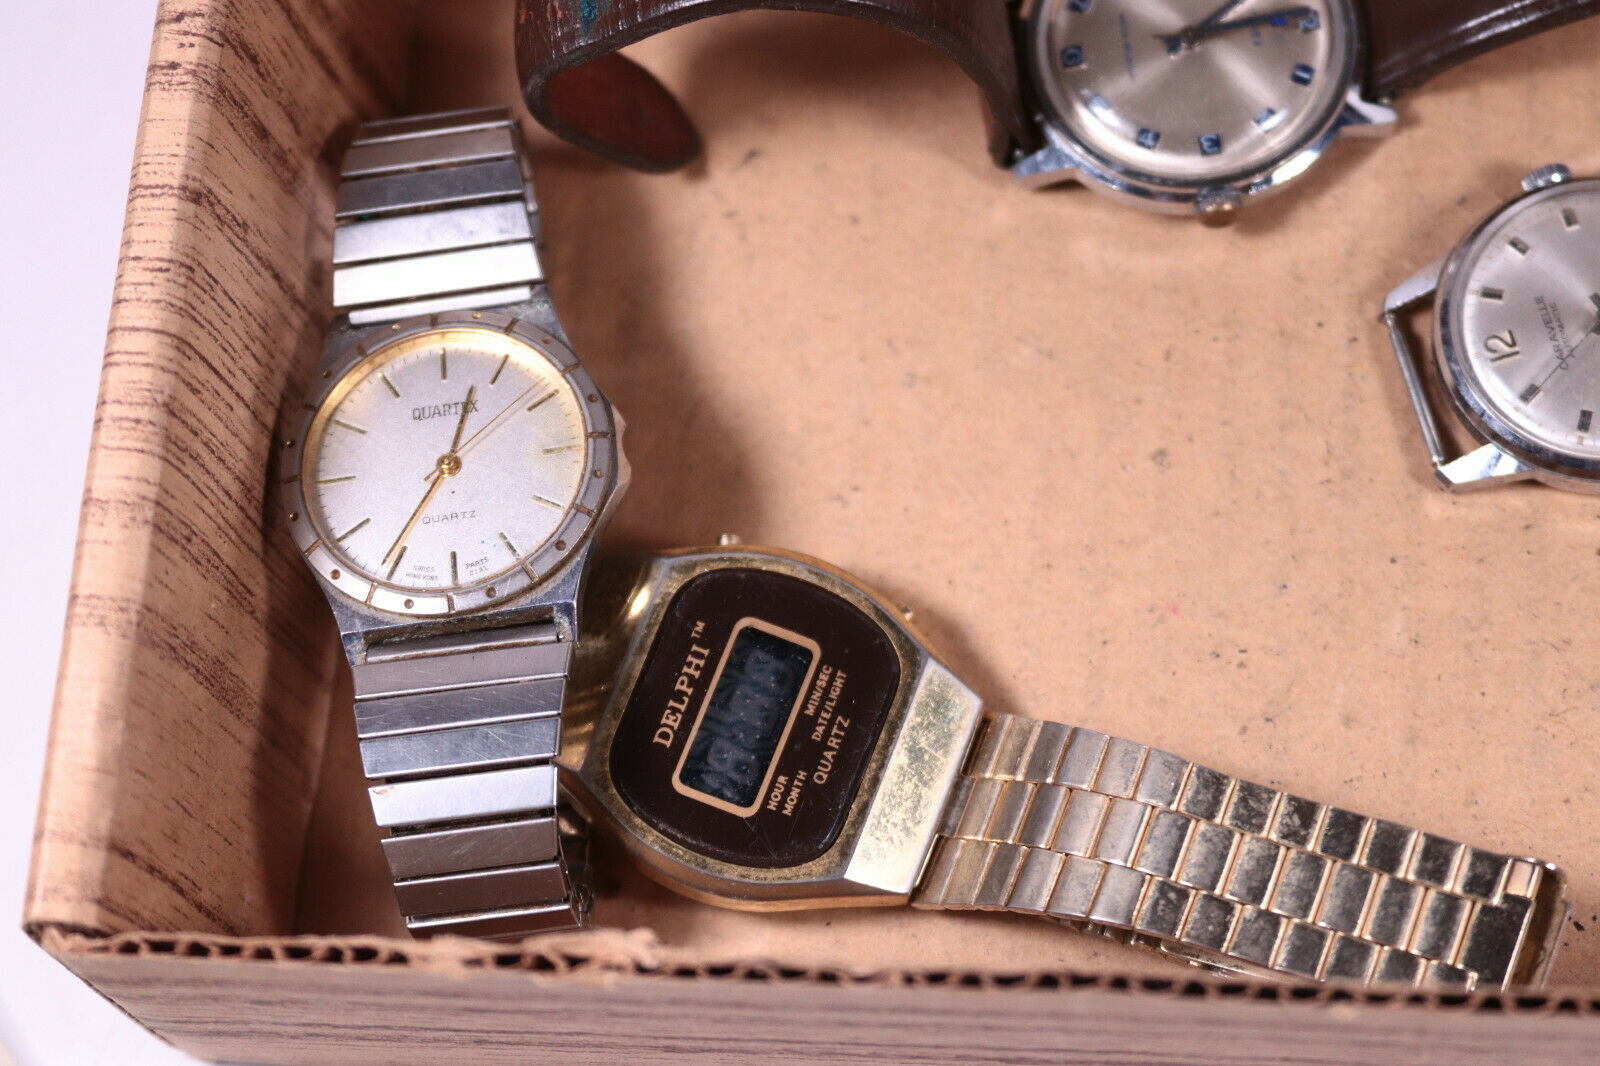 Lady Watch in Hyderabad, Free classifieds in Hyderabad | OLX